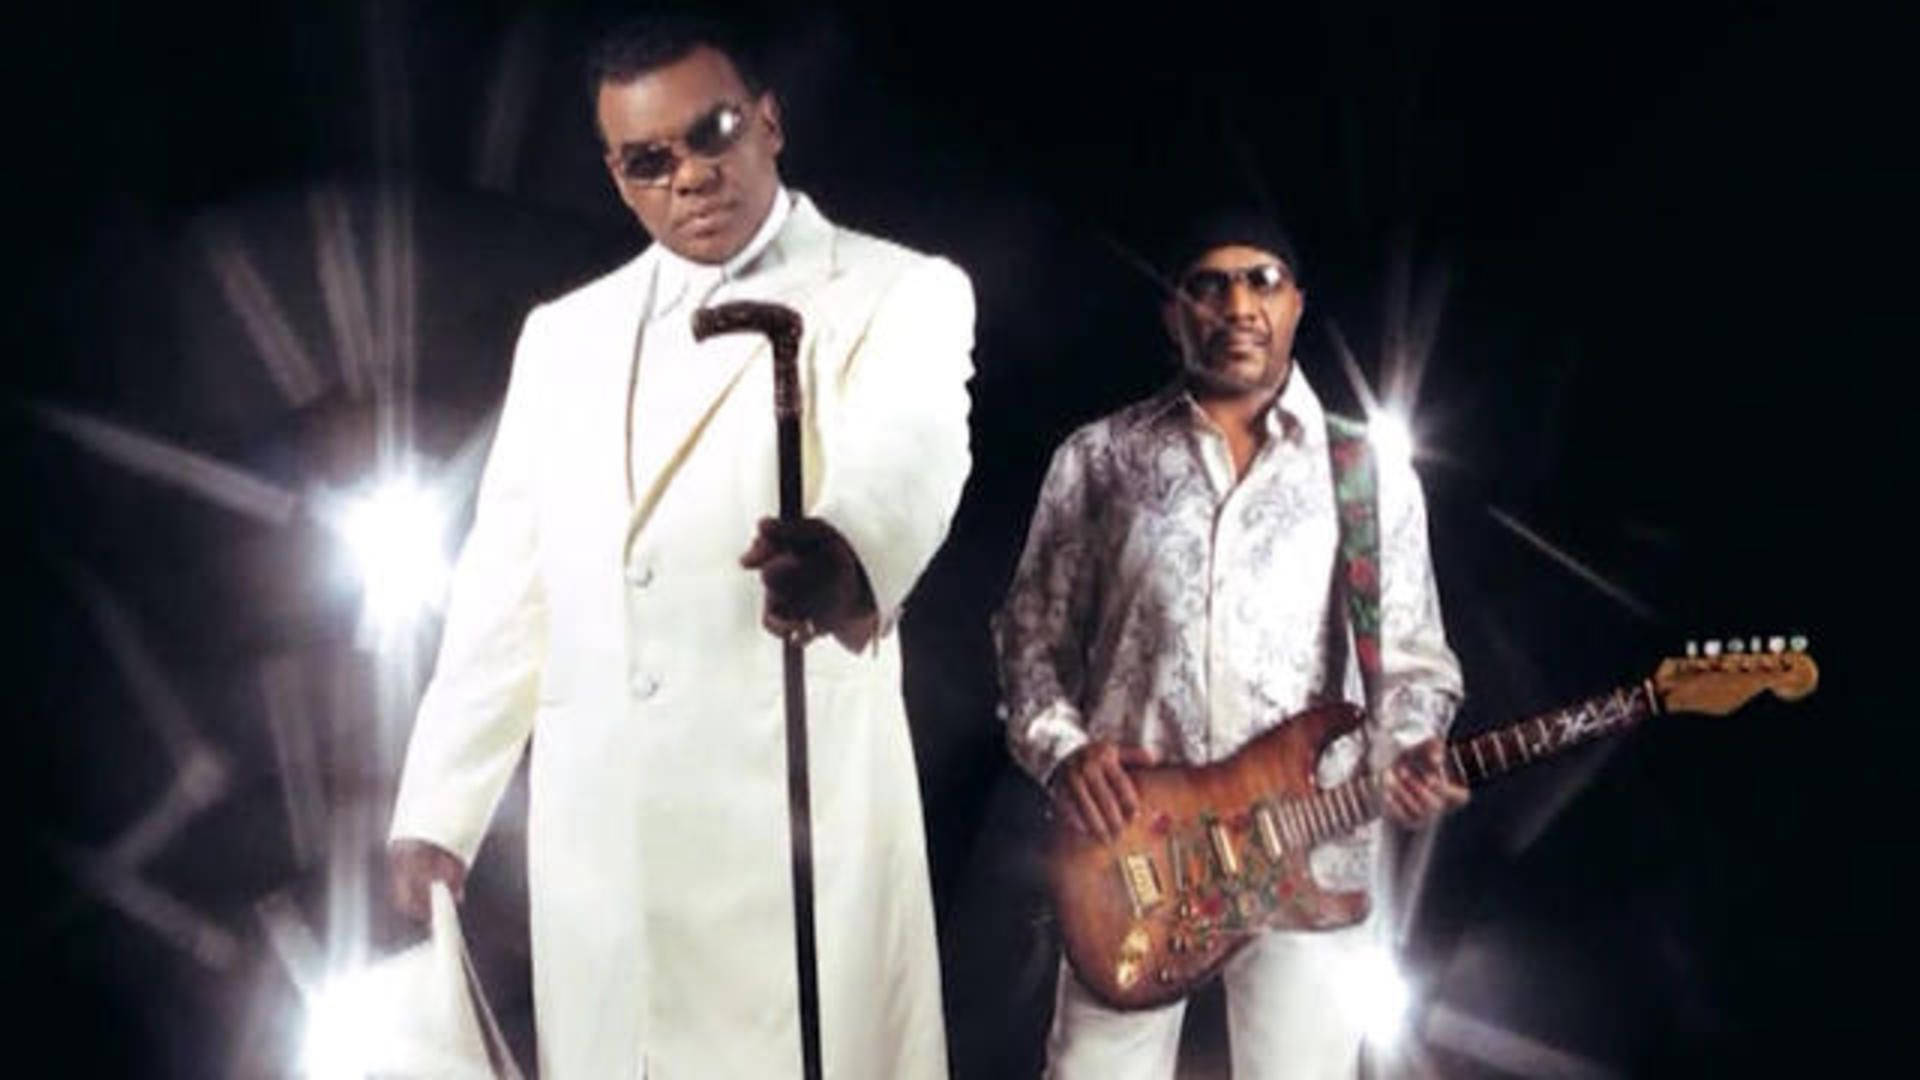 Legendary R&B group, The Isley Brothers with lead singer Ronald Isley. Wallpaper